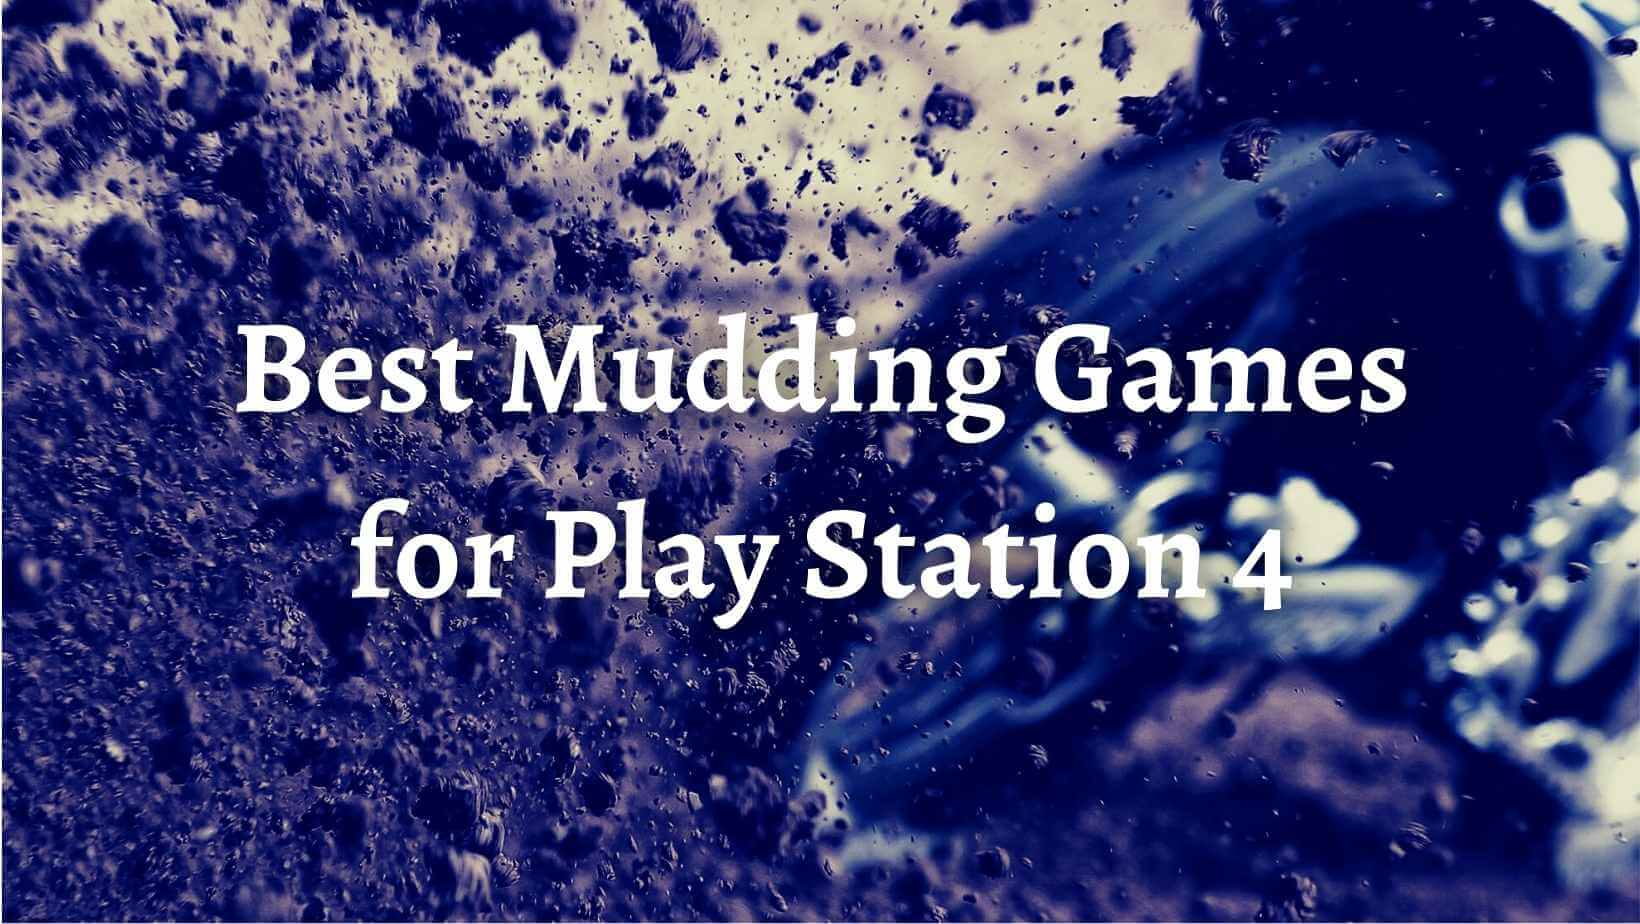 13 Best Mudding Games for Play Station 4 (PS4)